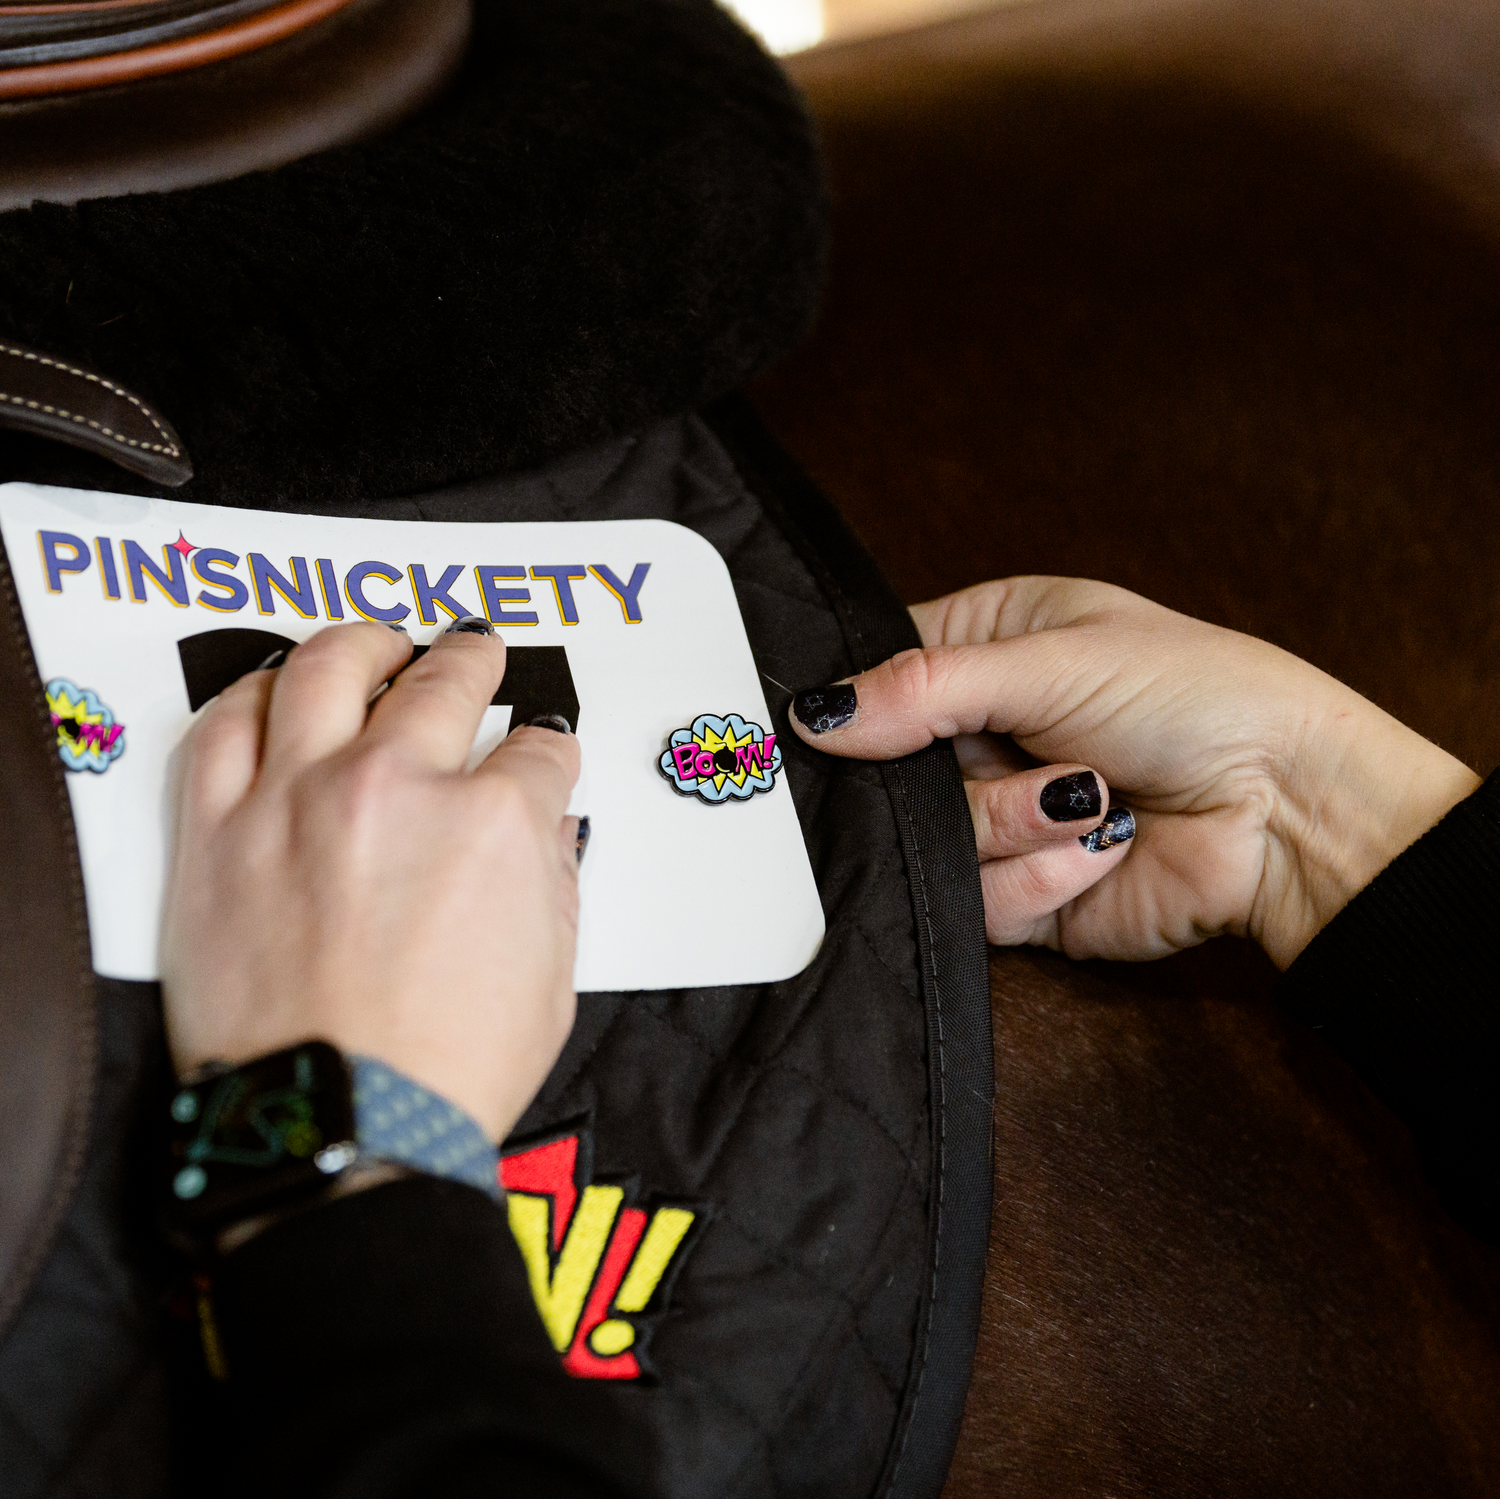 Pinsnickety Boom! horse show number pins being put on a saddle pad